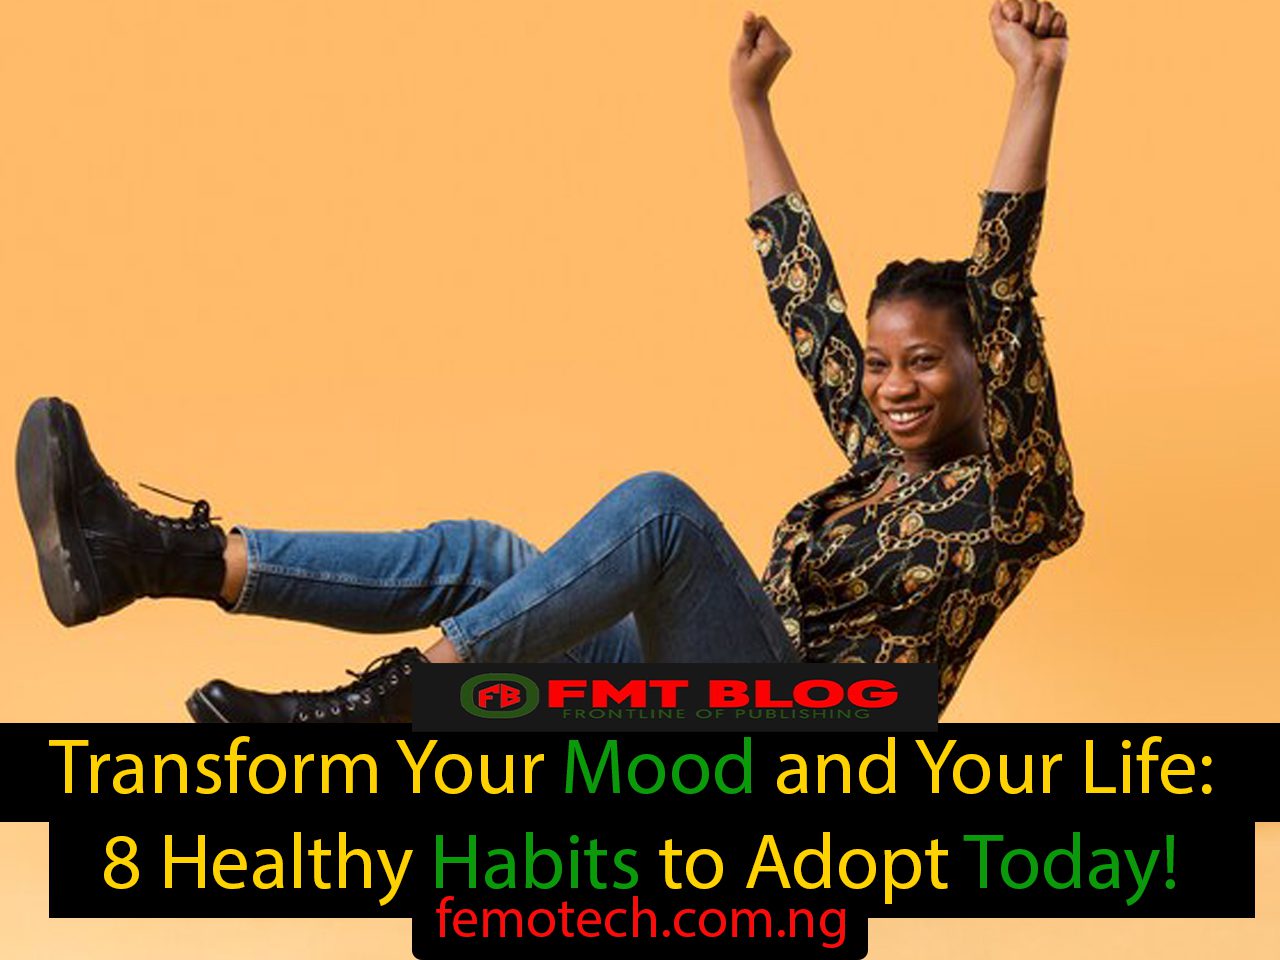 Transform Your Mood and Your Life: 8 Healthy Habits to Adopt Today